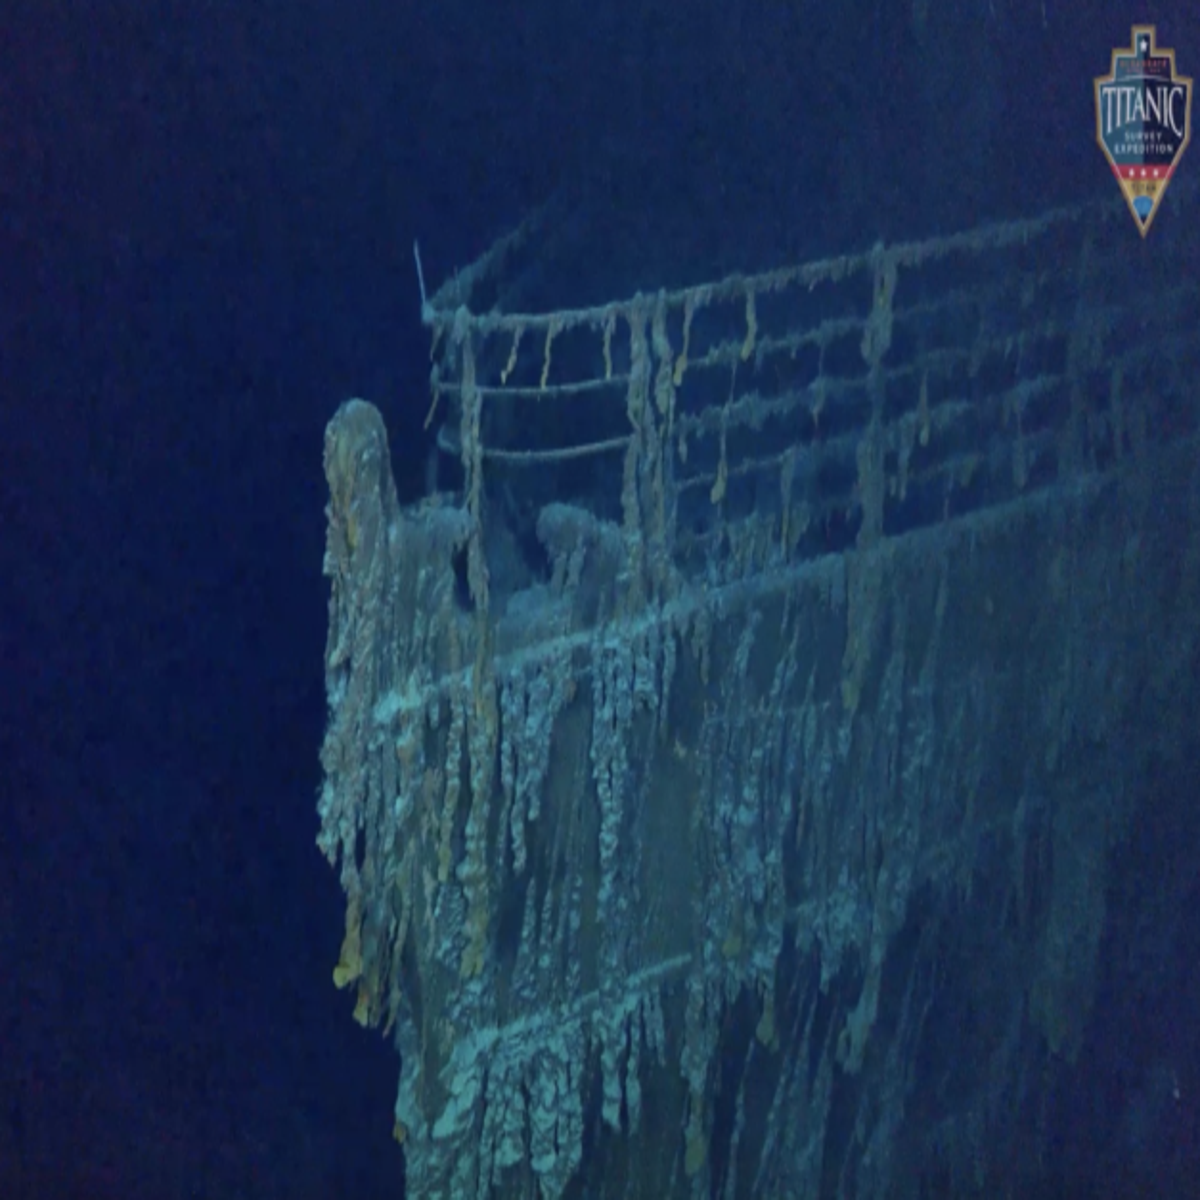 Titanic's rusty underwater ruins continue to deteriorate, survey team says  | The Independent